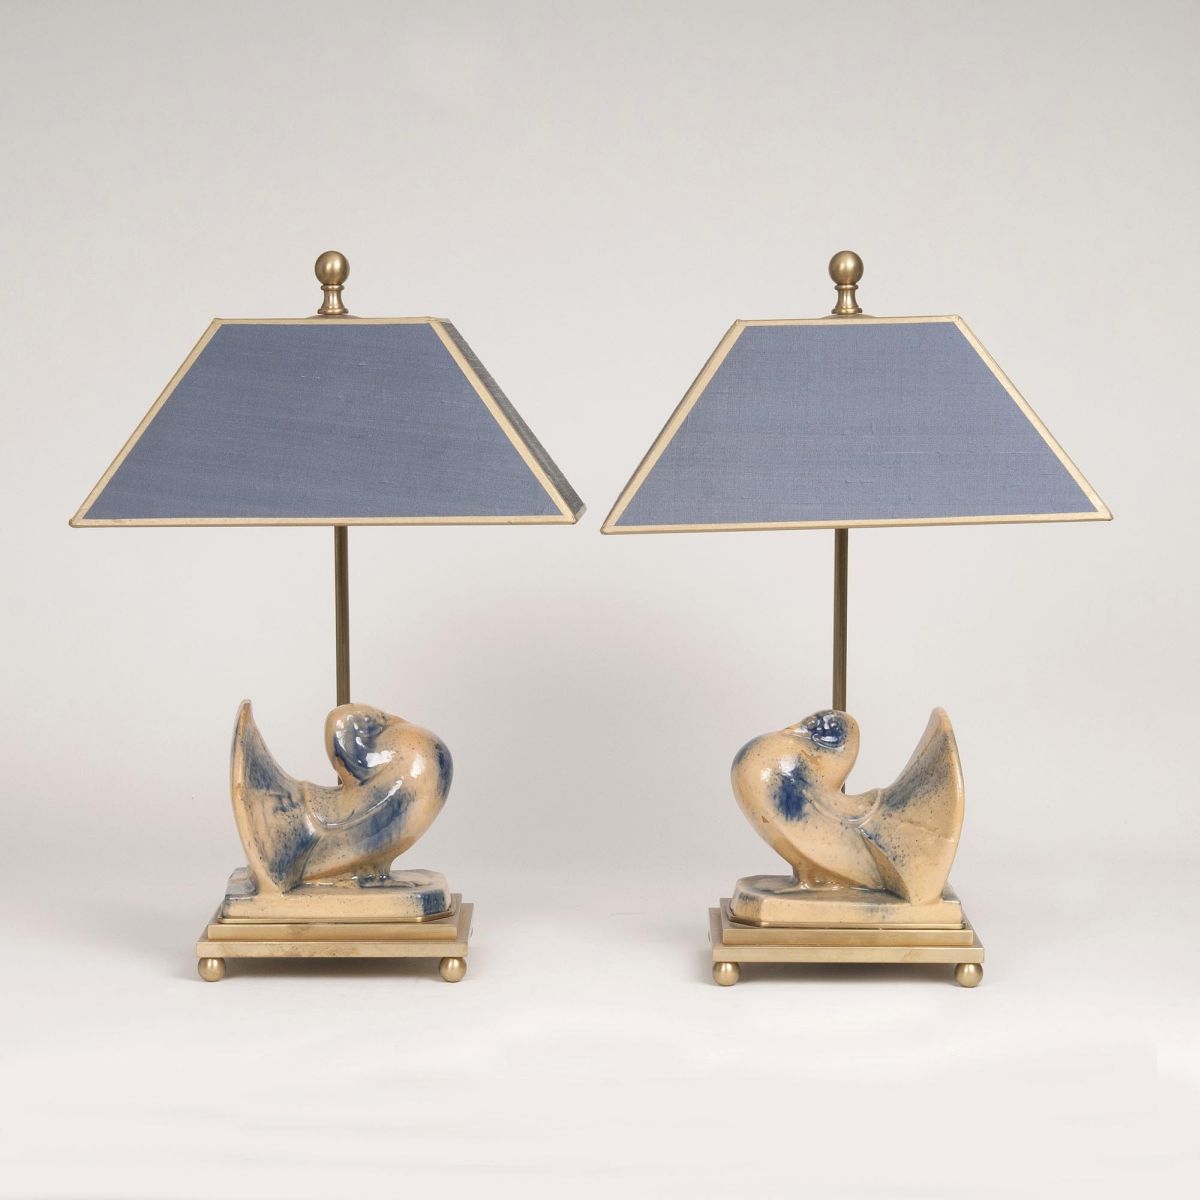 A Pair of Decorative Table Lamps 'Pigeon'